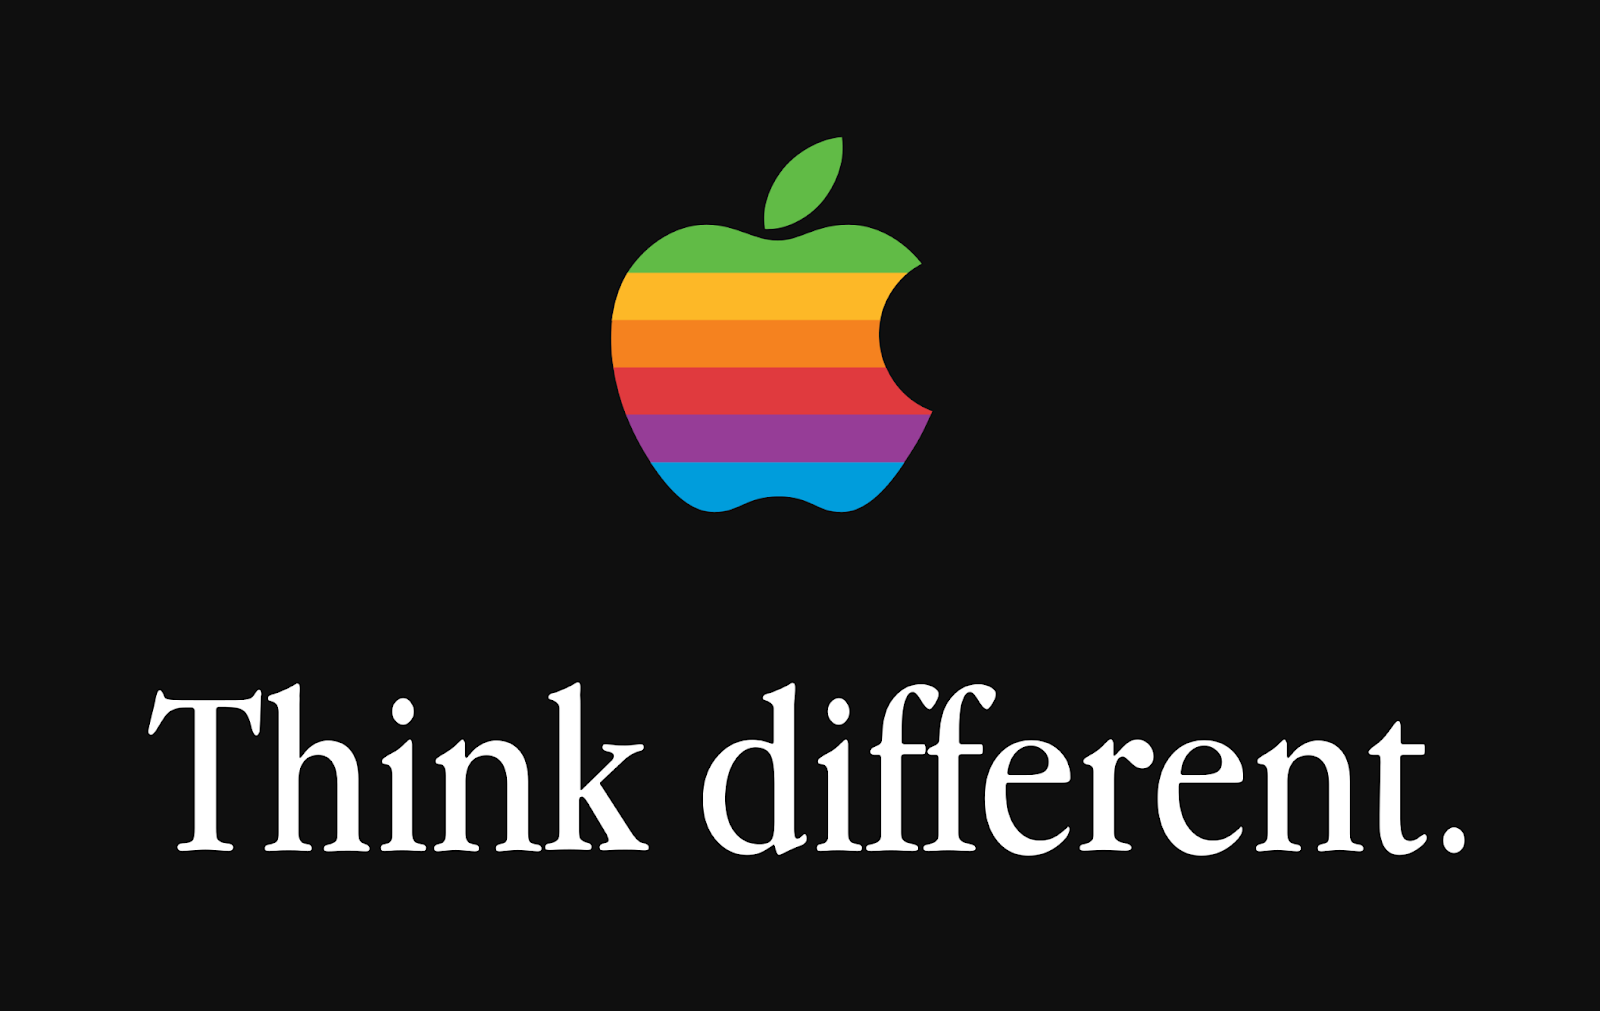 Apple's “Think Different” copy below the Apple logo